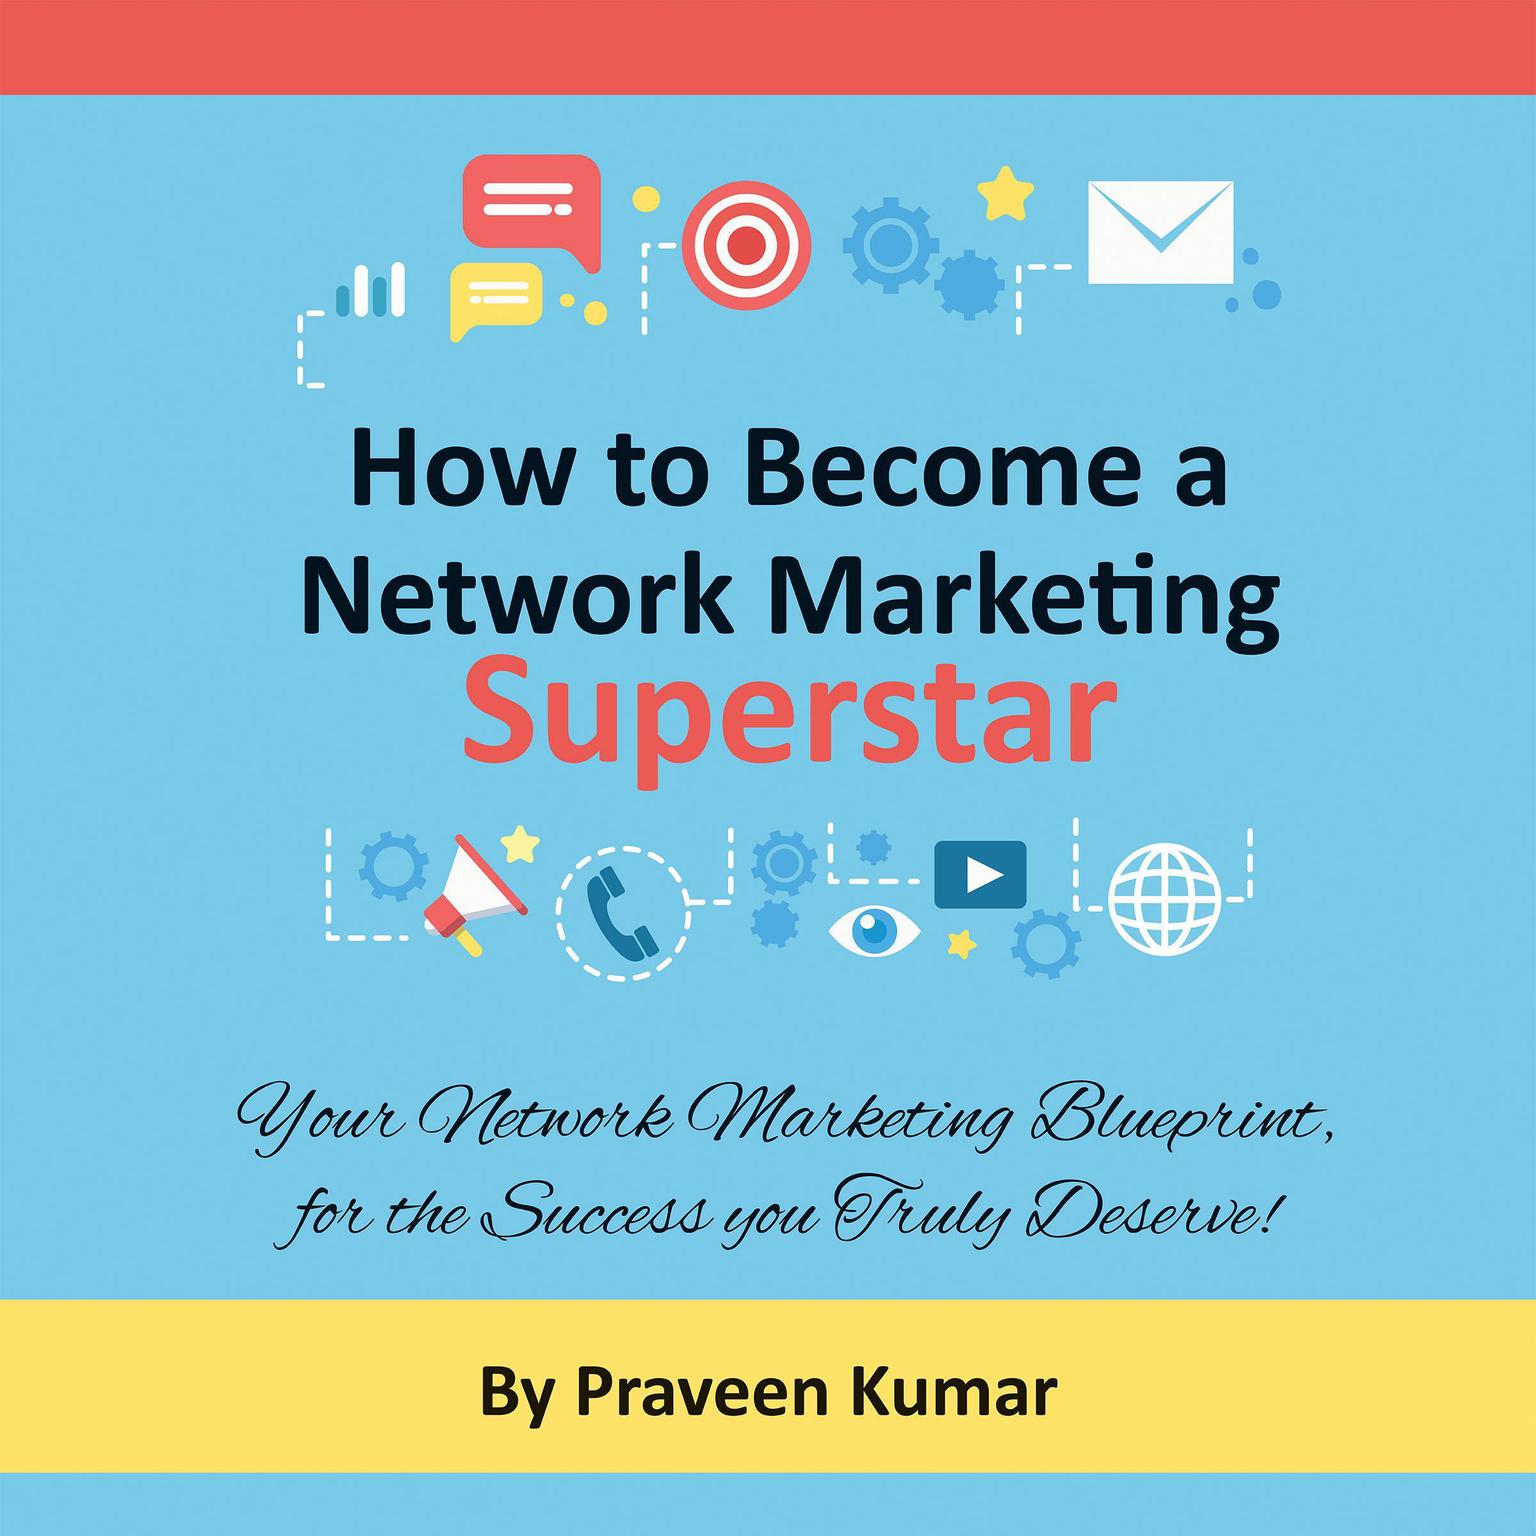 How to Become a Network Marketing Superstar Audiobook, by Praveen Kumar